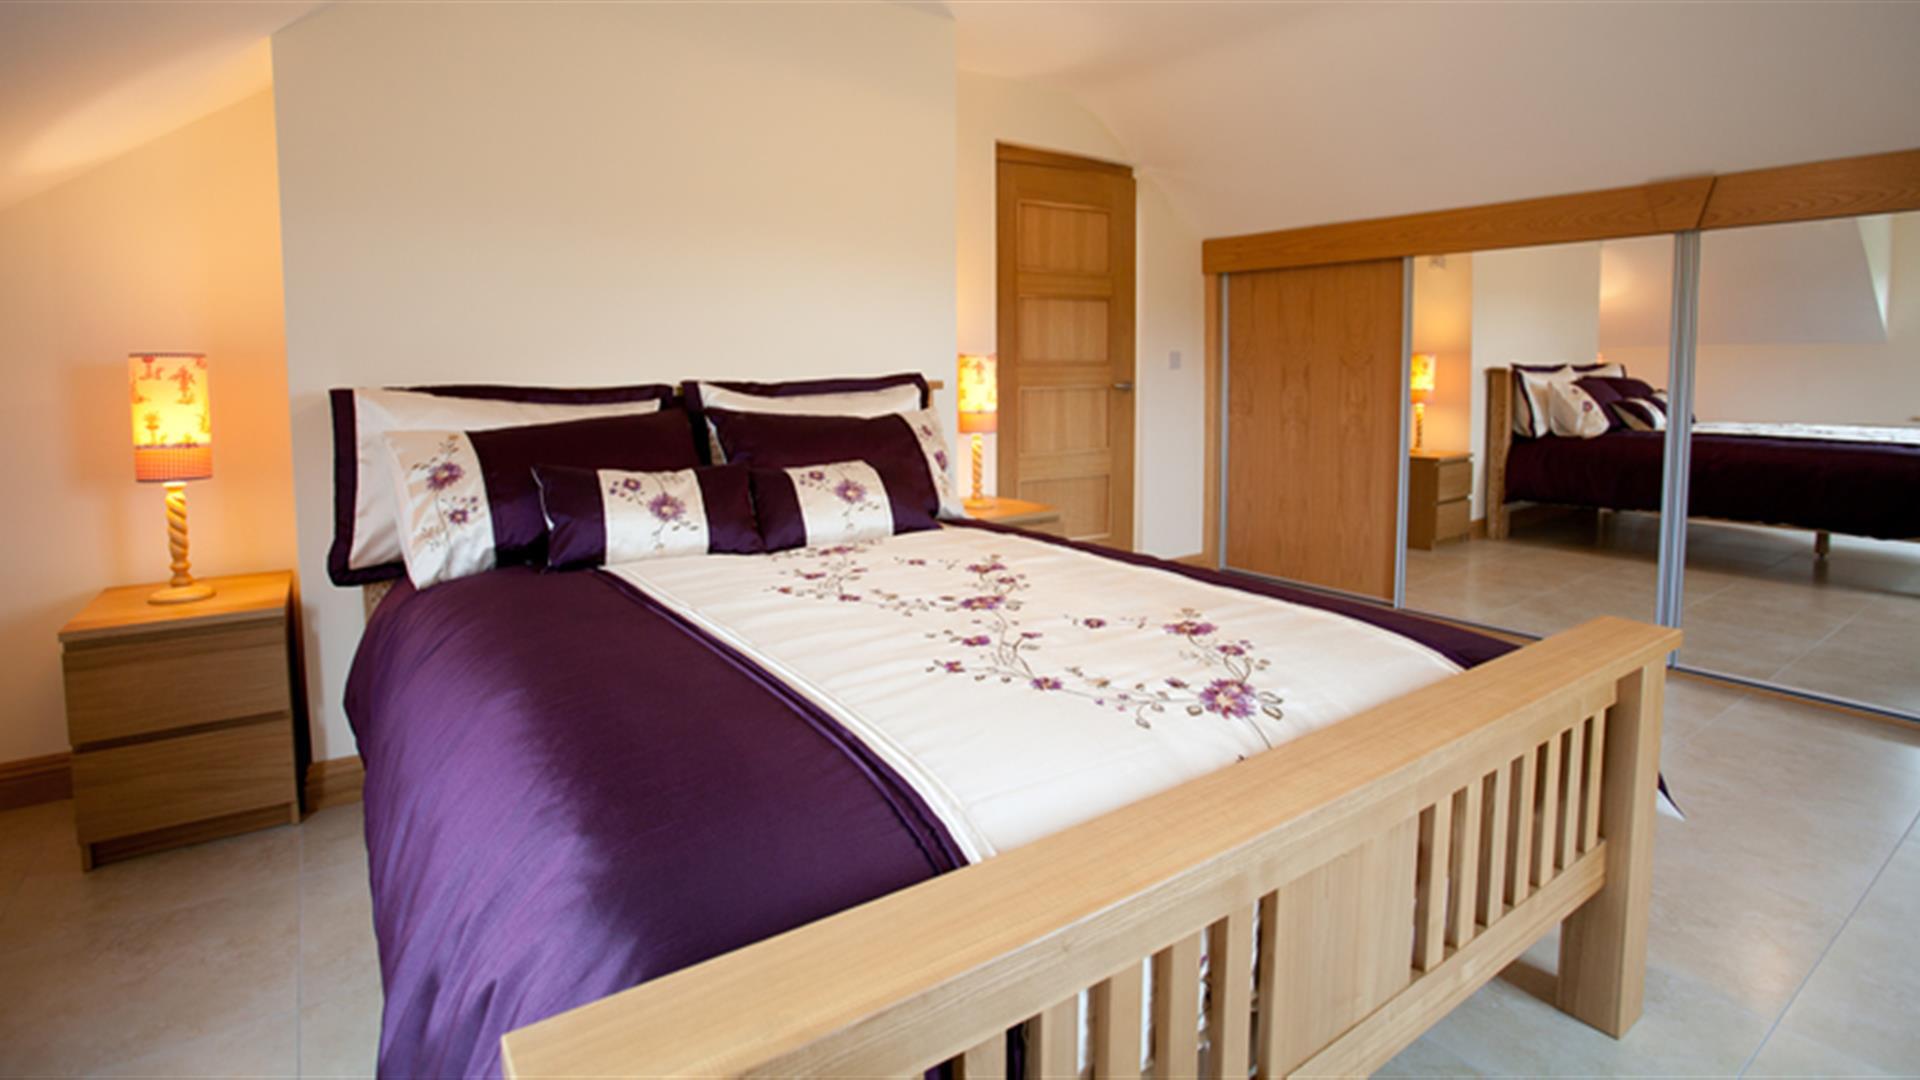 Double bedroom with sliding mirror wardrobe doors, double bed and bedside lockers